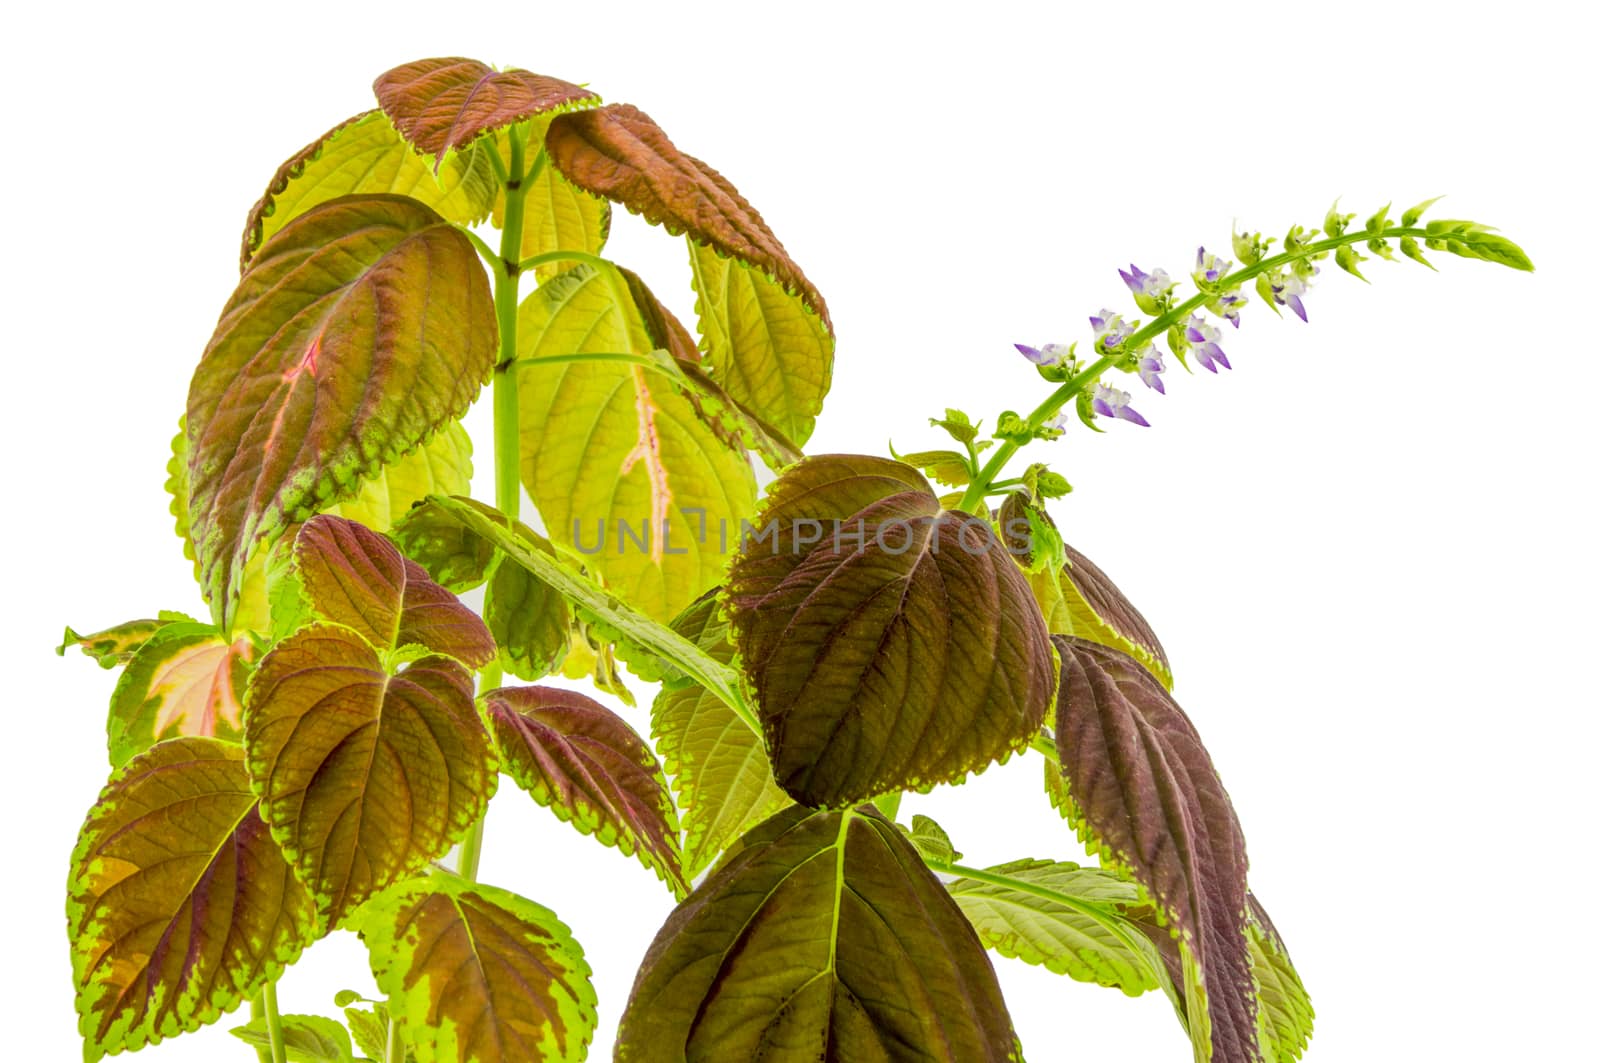 Coleus flowers isolated on white background. For your commercial and editorial use.